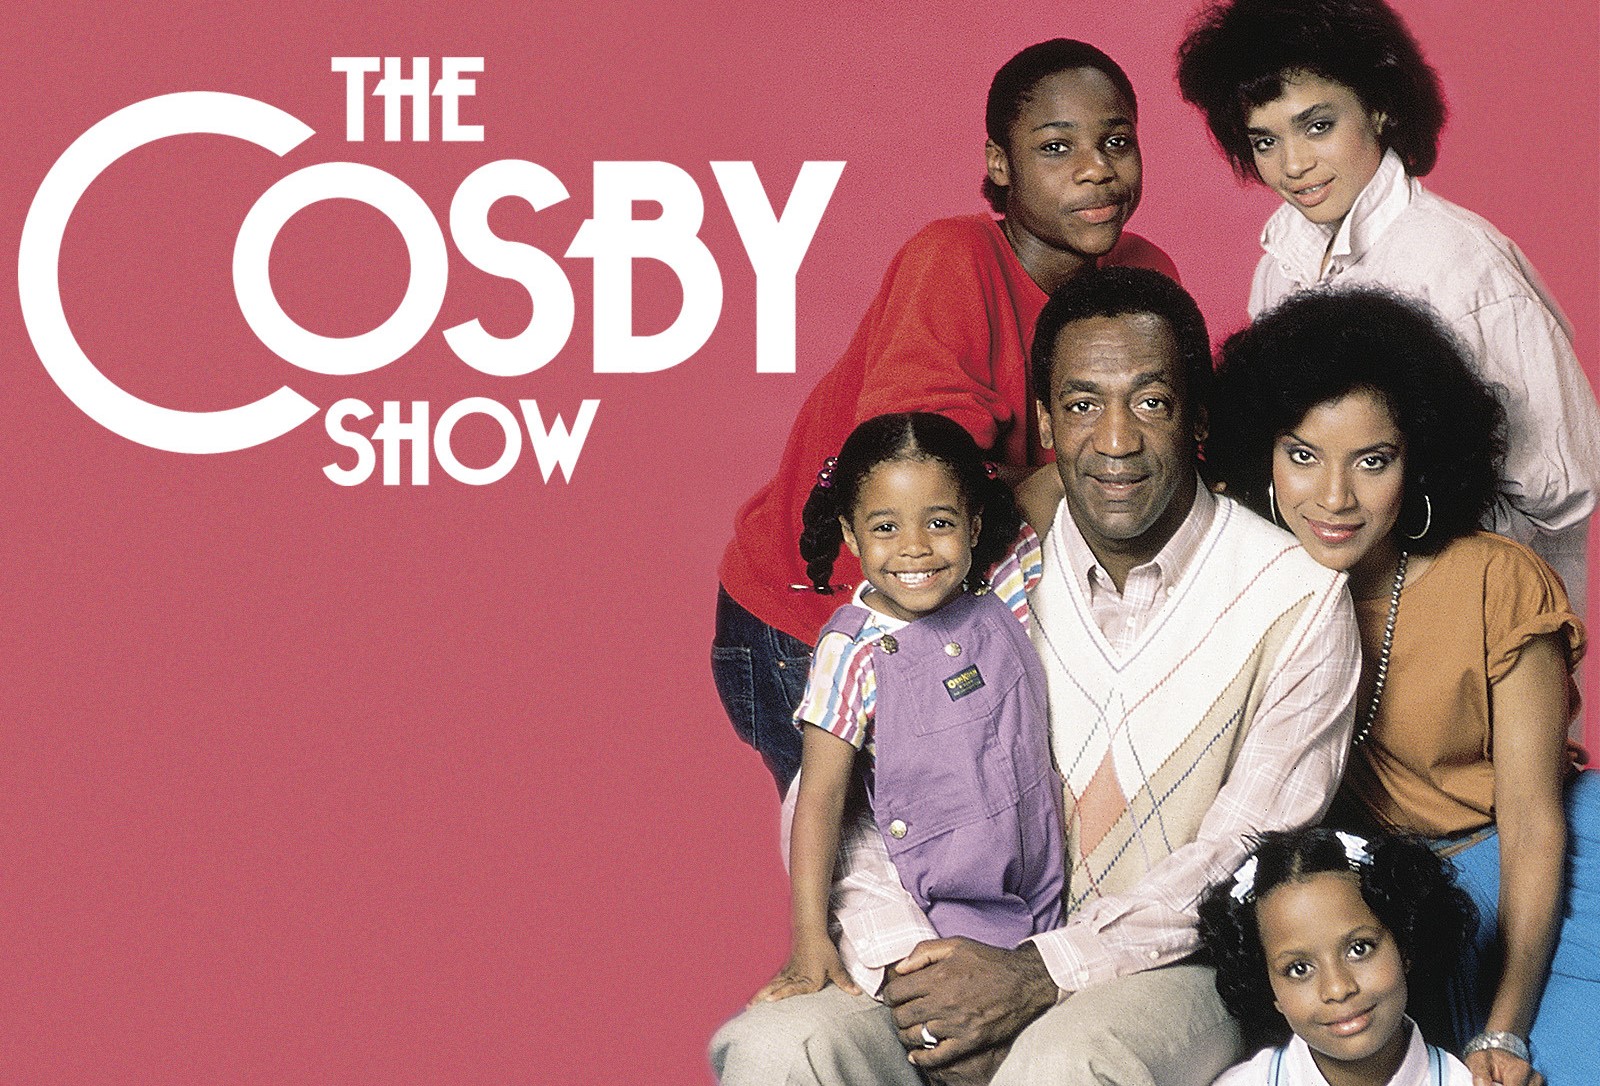 The Cosby Show Sitcom - The Complete Series Watch Online